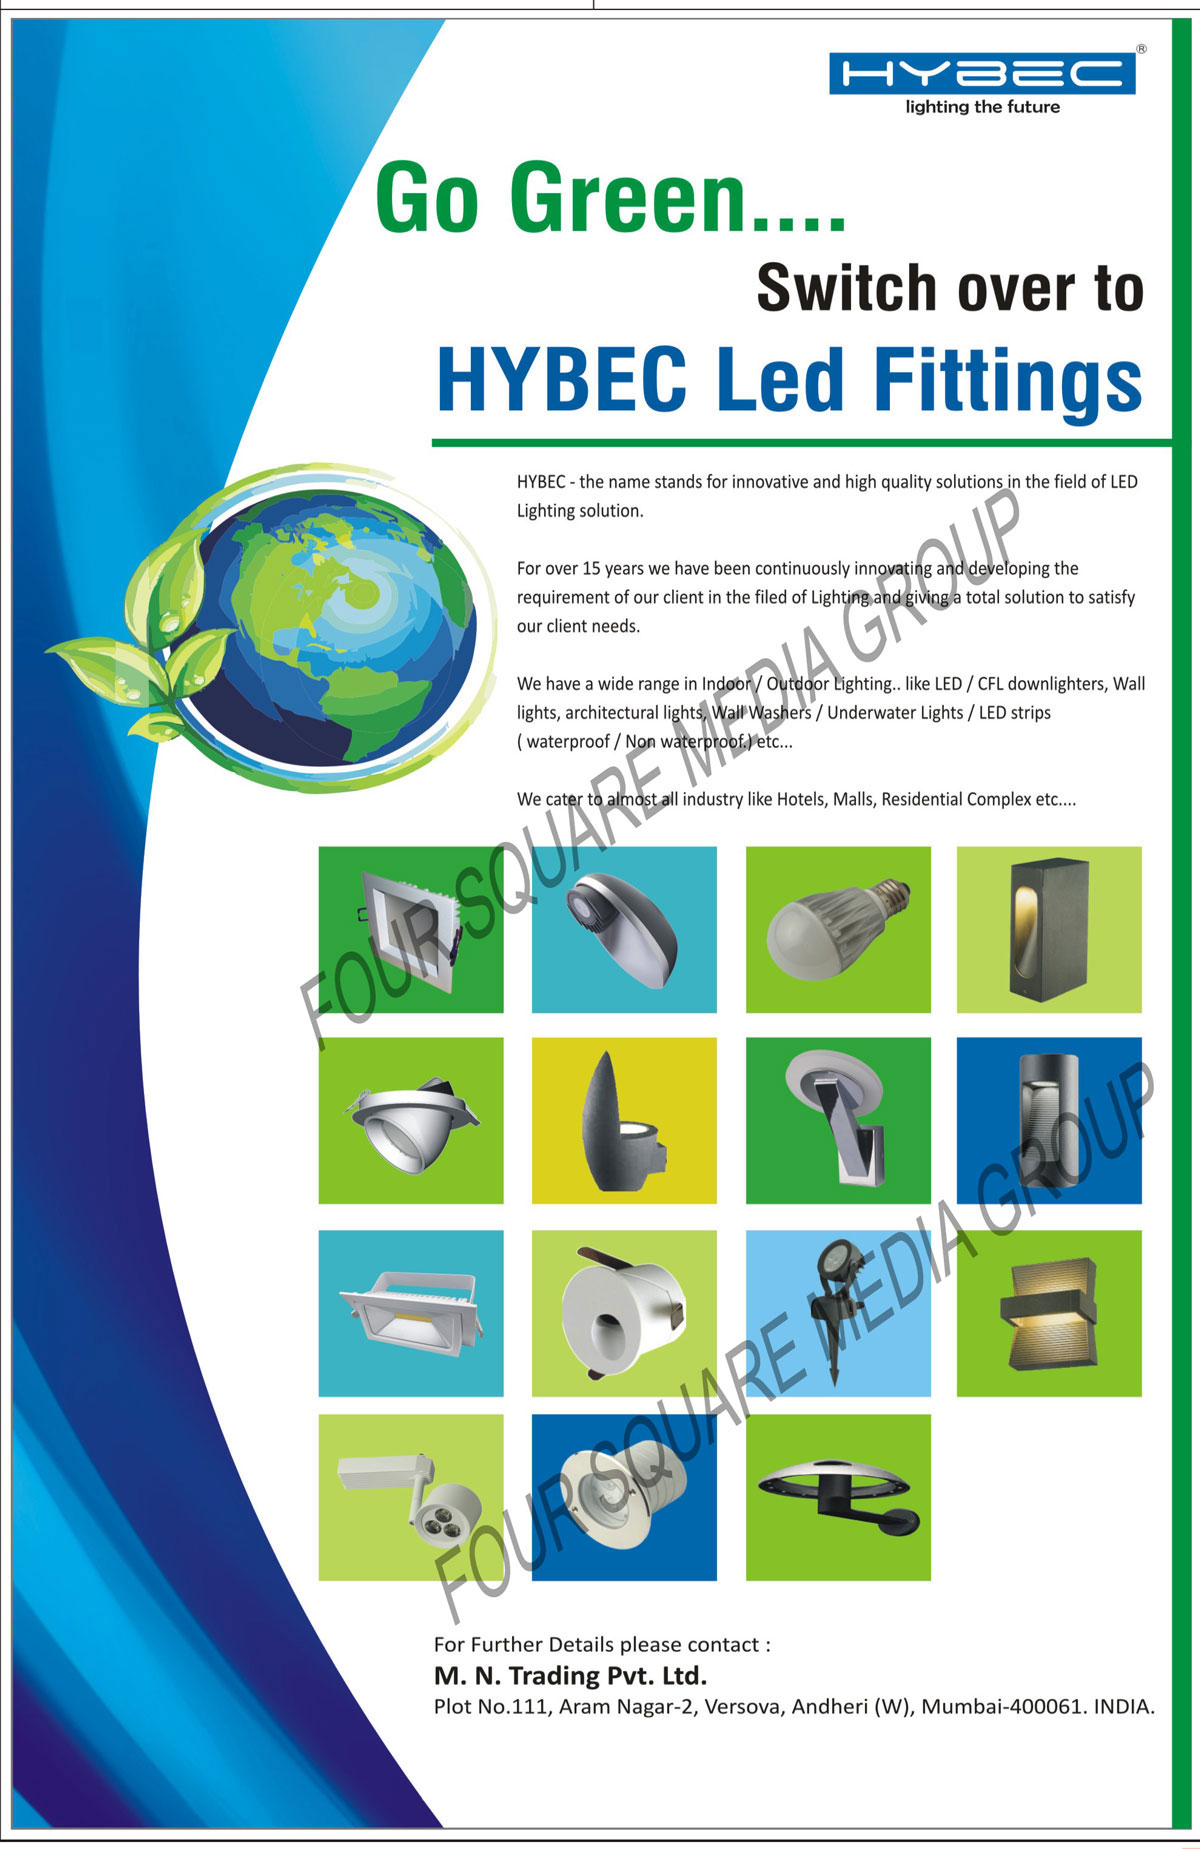 Indoor Lights, Outdoor Lights, Residential Lights, Commercial Lights, Hospitality Lights, Architectural Lights, Led Lights, Led Down lights, Led Wall Lights, Led Wall Washers, Led Underwater Lights, Led Strips, CFL Down lights, Led Products, Ceiling Lamps, Down Lighters, Spot Lights, Outdoor Lights, Suspended Lights, Wall Lamps